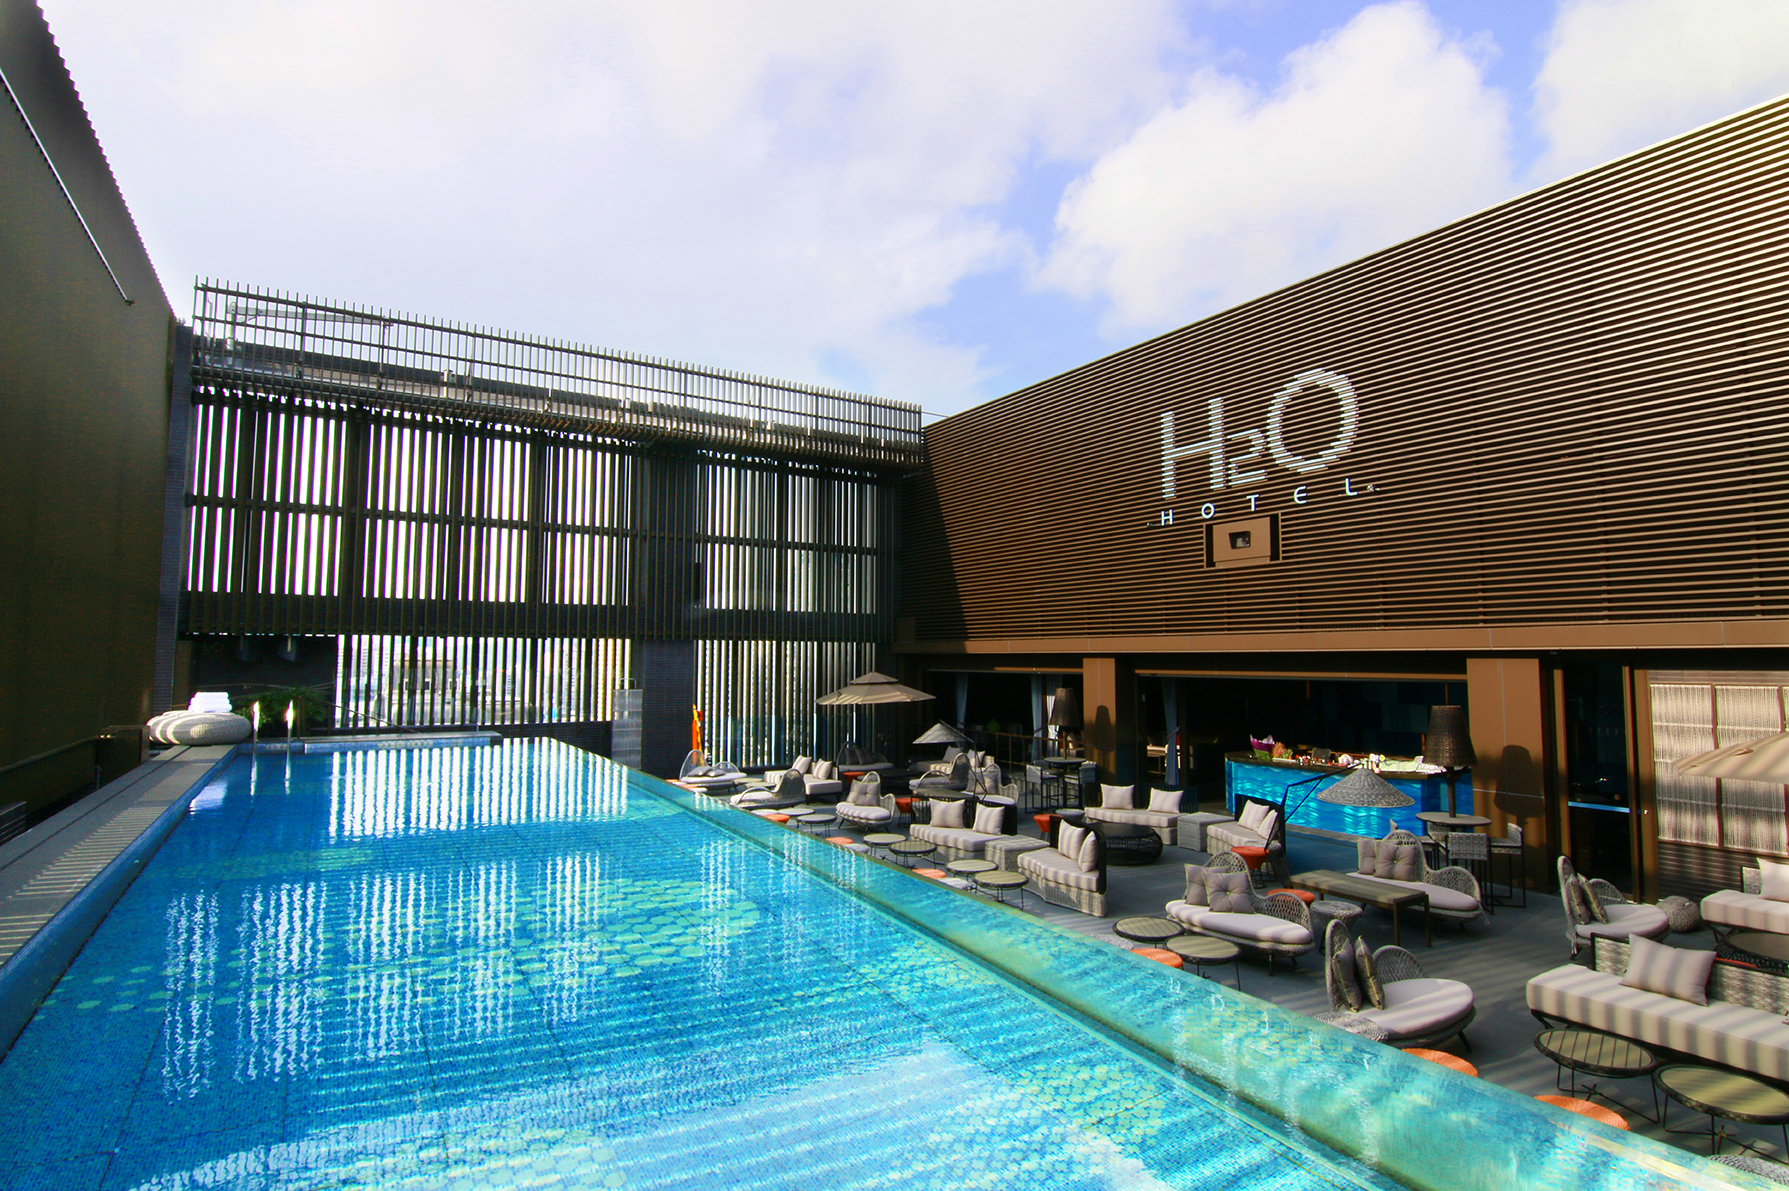 H2O Hotel:1 photos in total